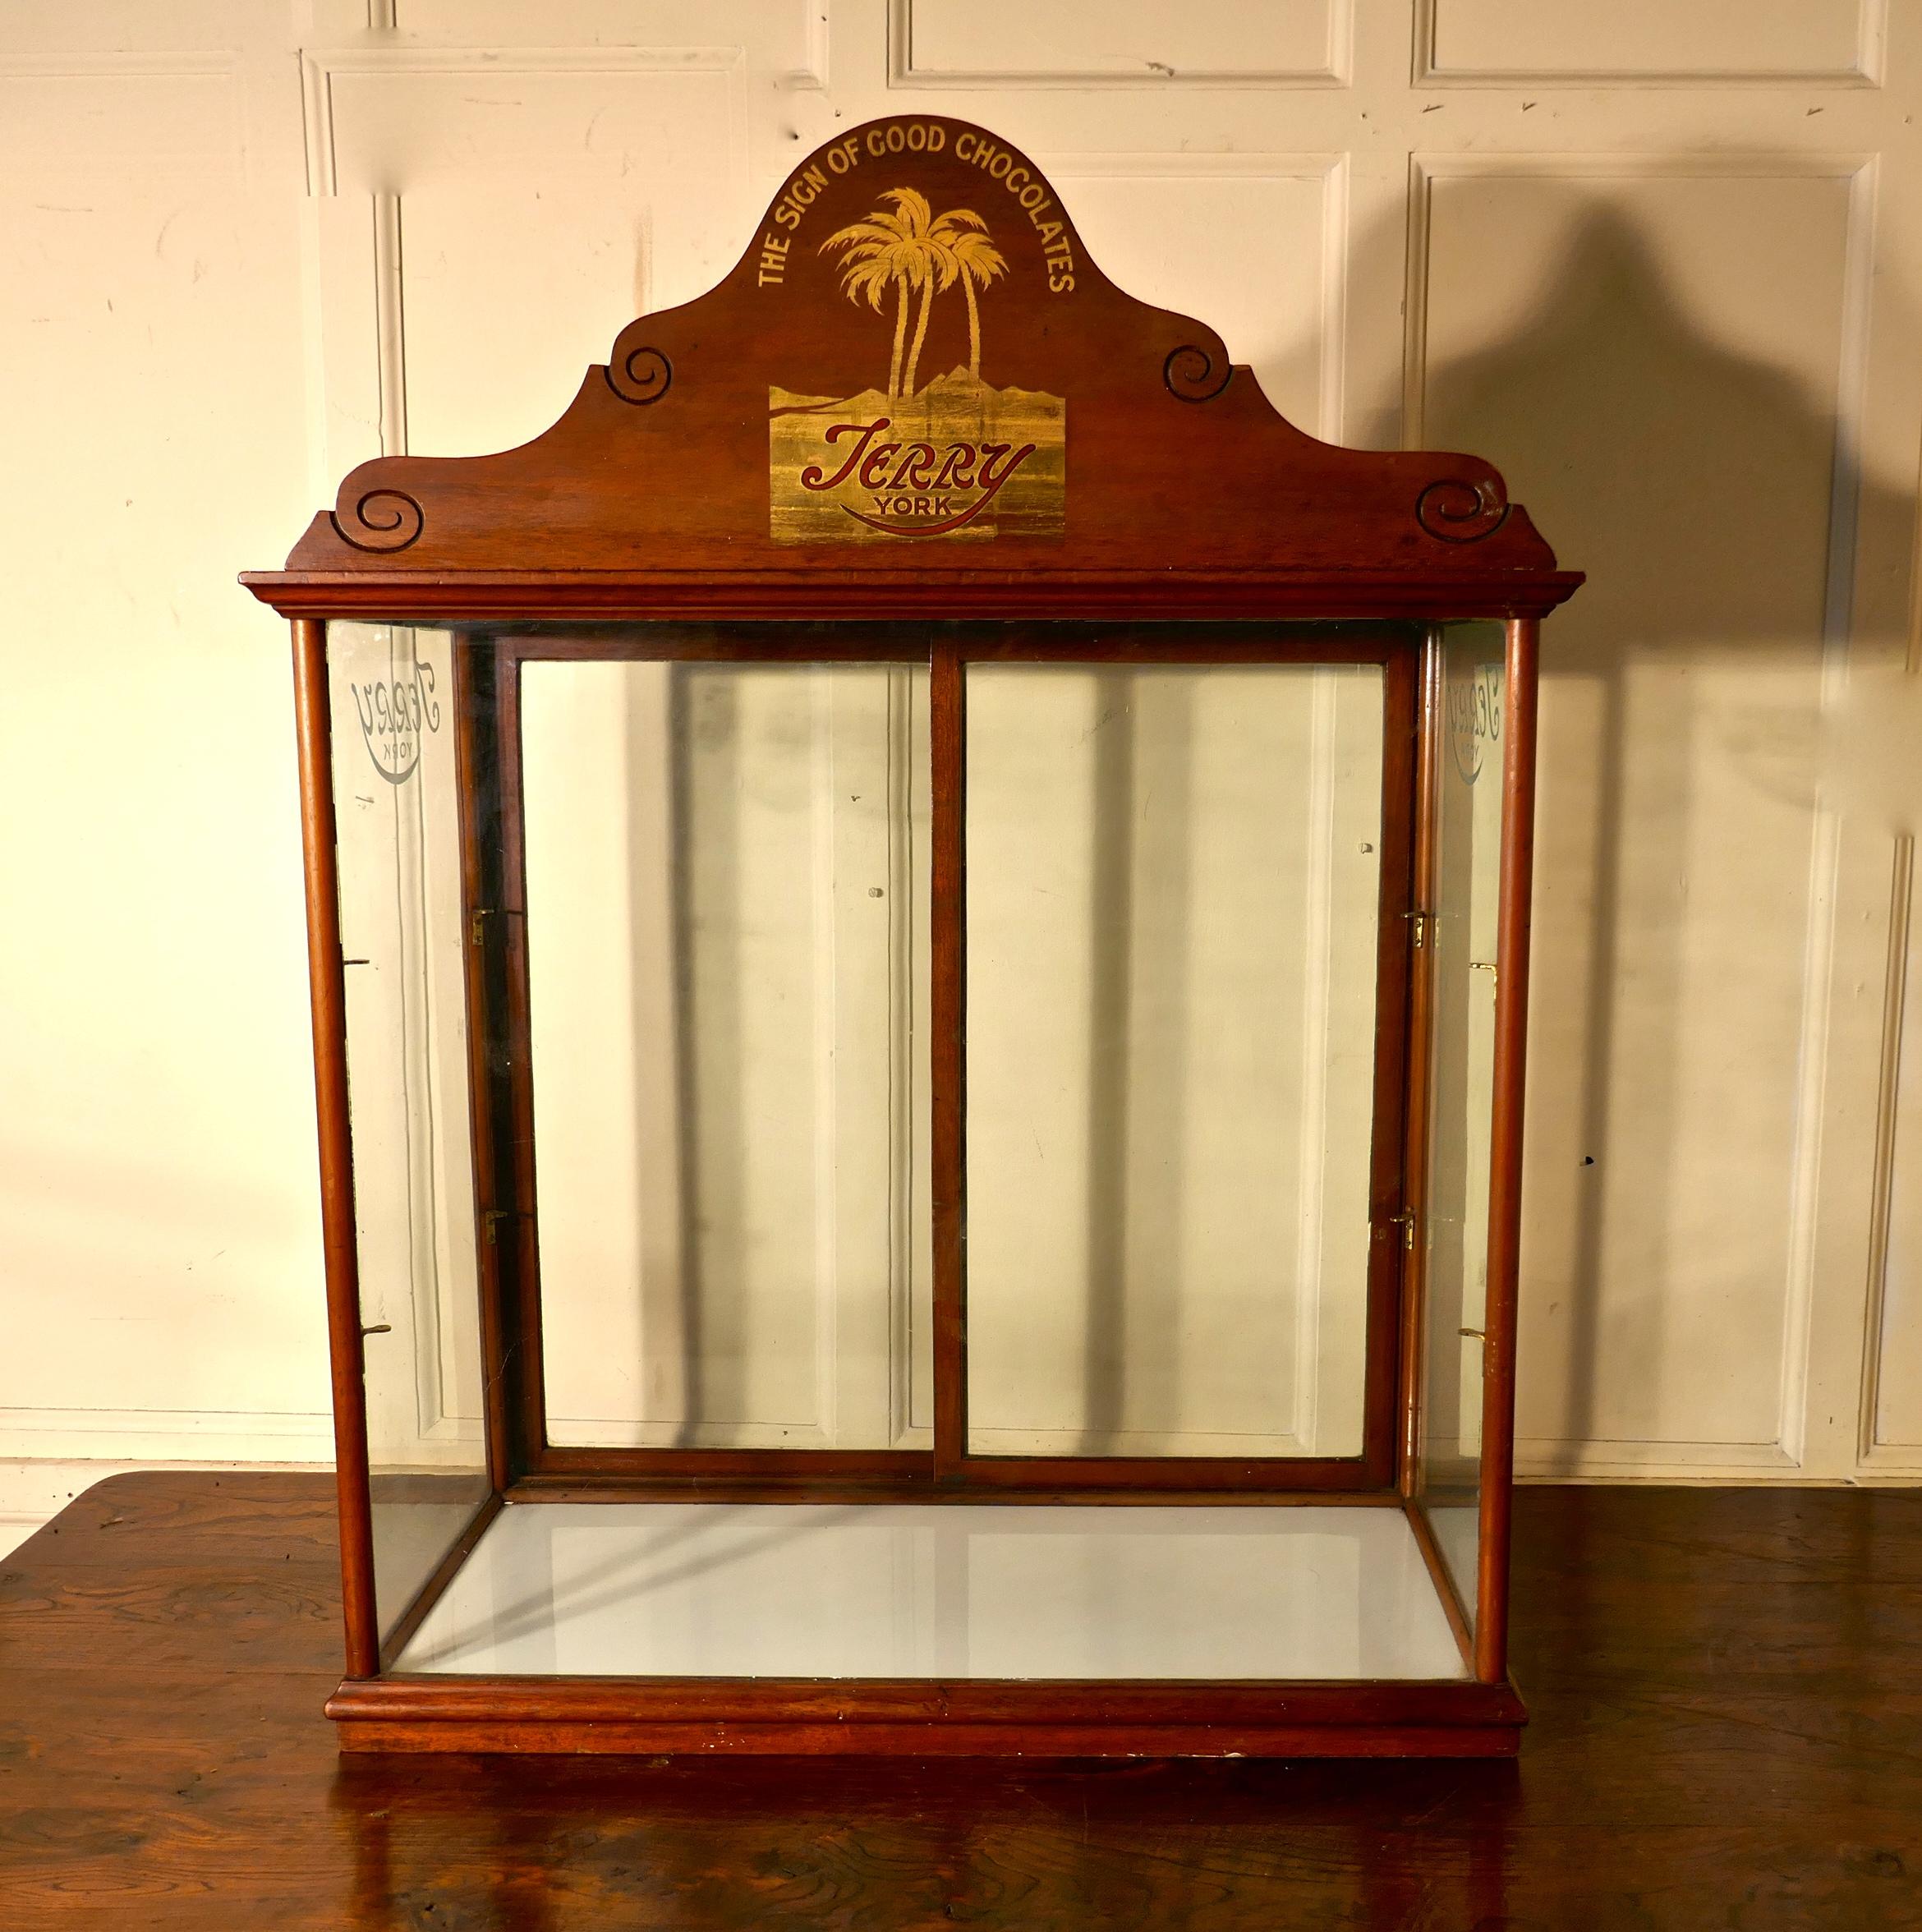 Terry’s of York Chocolate Confectionary Display Cabinet 

Glazed advertising Shop Display Cabinet,  the cabinet has a rather grand tall pediment, which has the Terry’s of York trade mark and logo (THE SIGN OF GOOD CHOCOLATES) in gold leaf on the